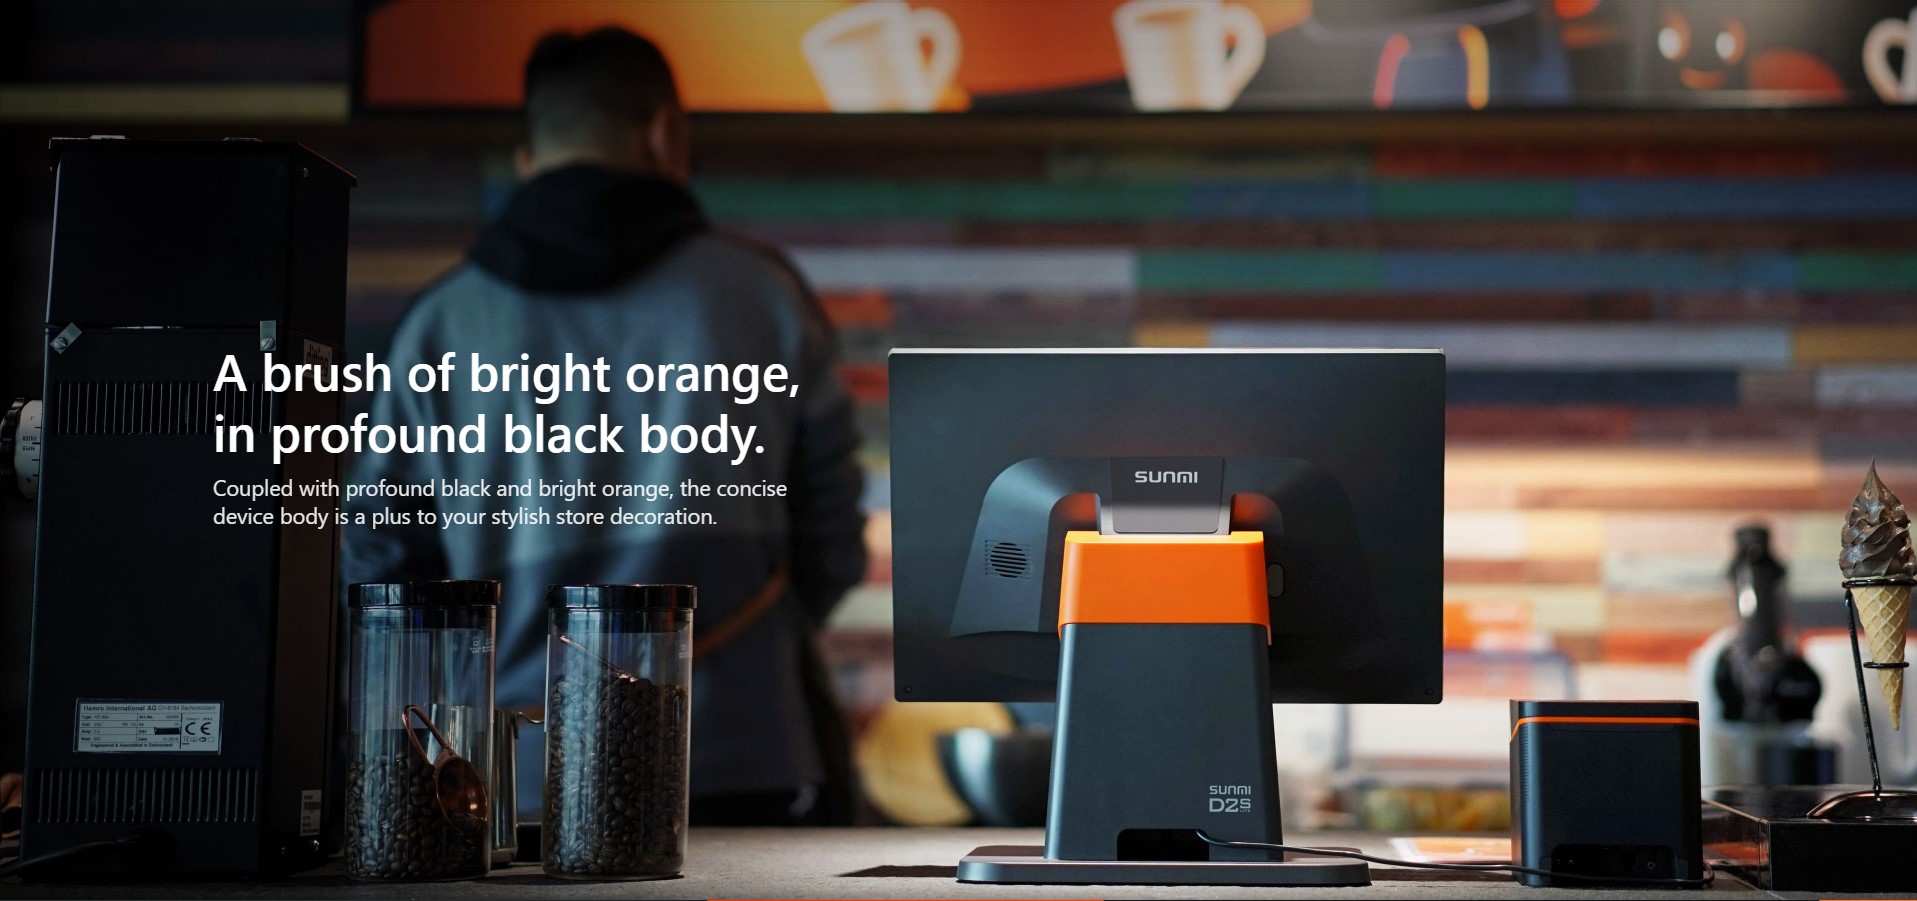 A brush of bright orange, in profound black body. Coupled with profound black and bright orange, the concise device body is a plus to your stylish store decoration.